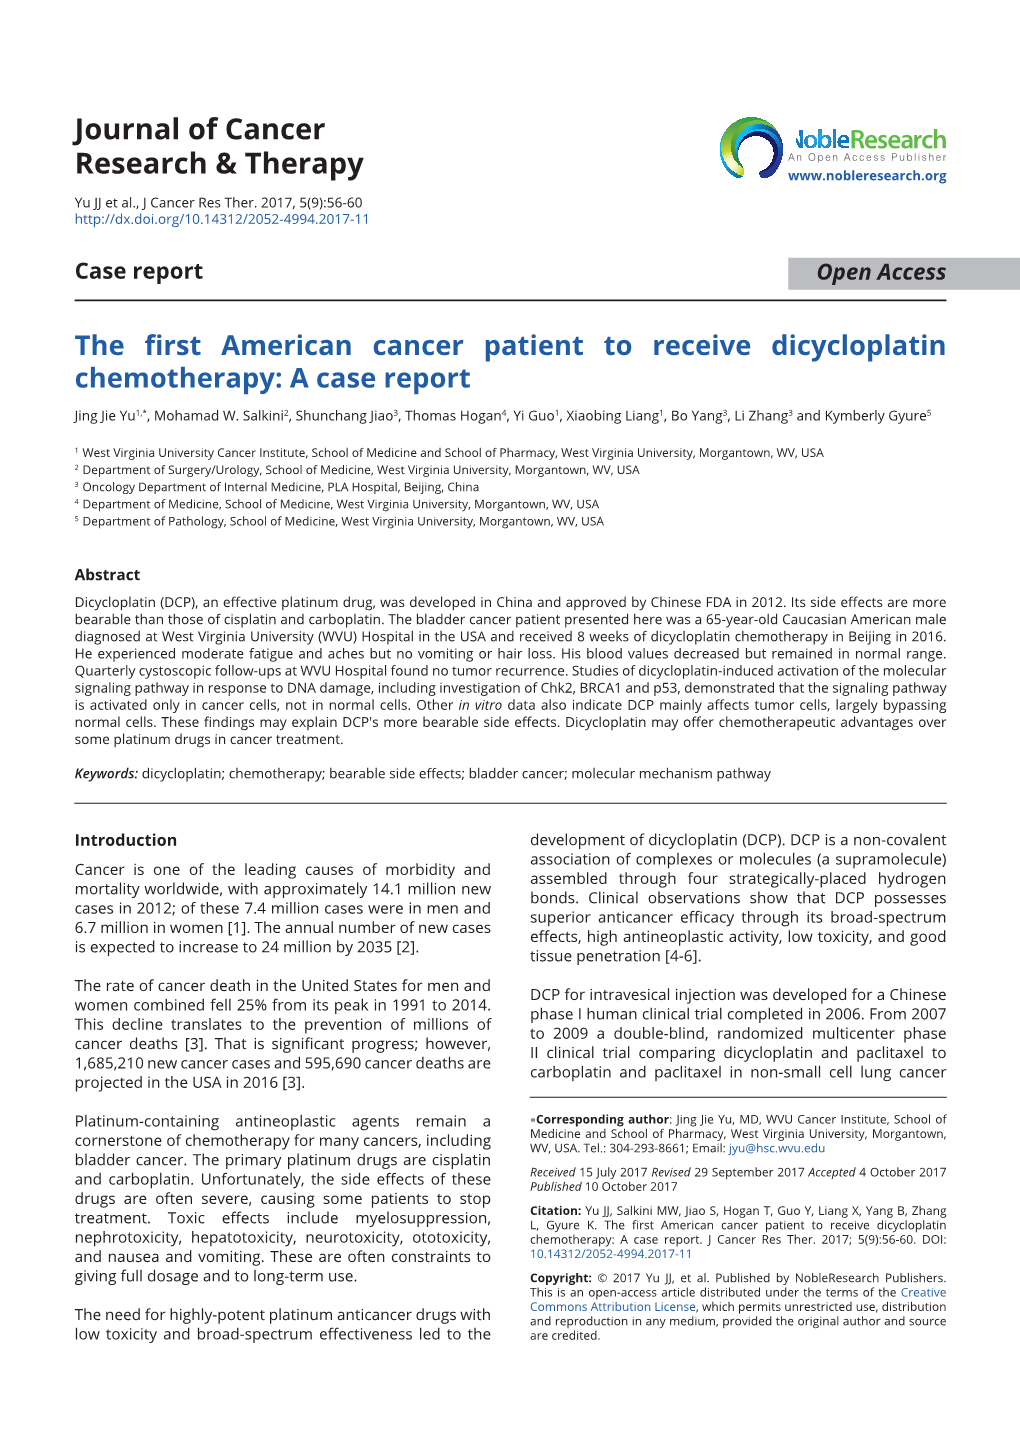 The First American Cancer Patient to Receive Dicycloplatin Chemotherapy: a Case Report